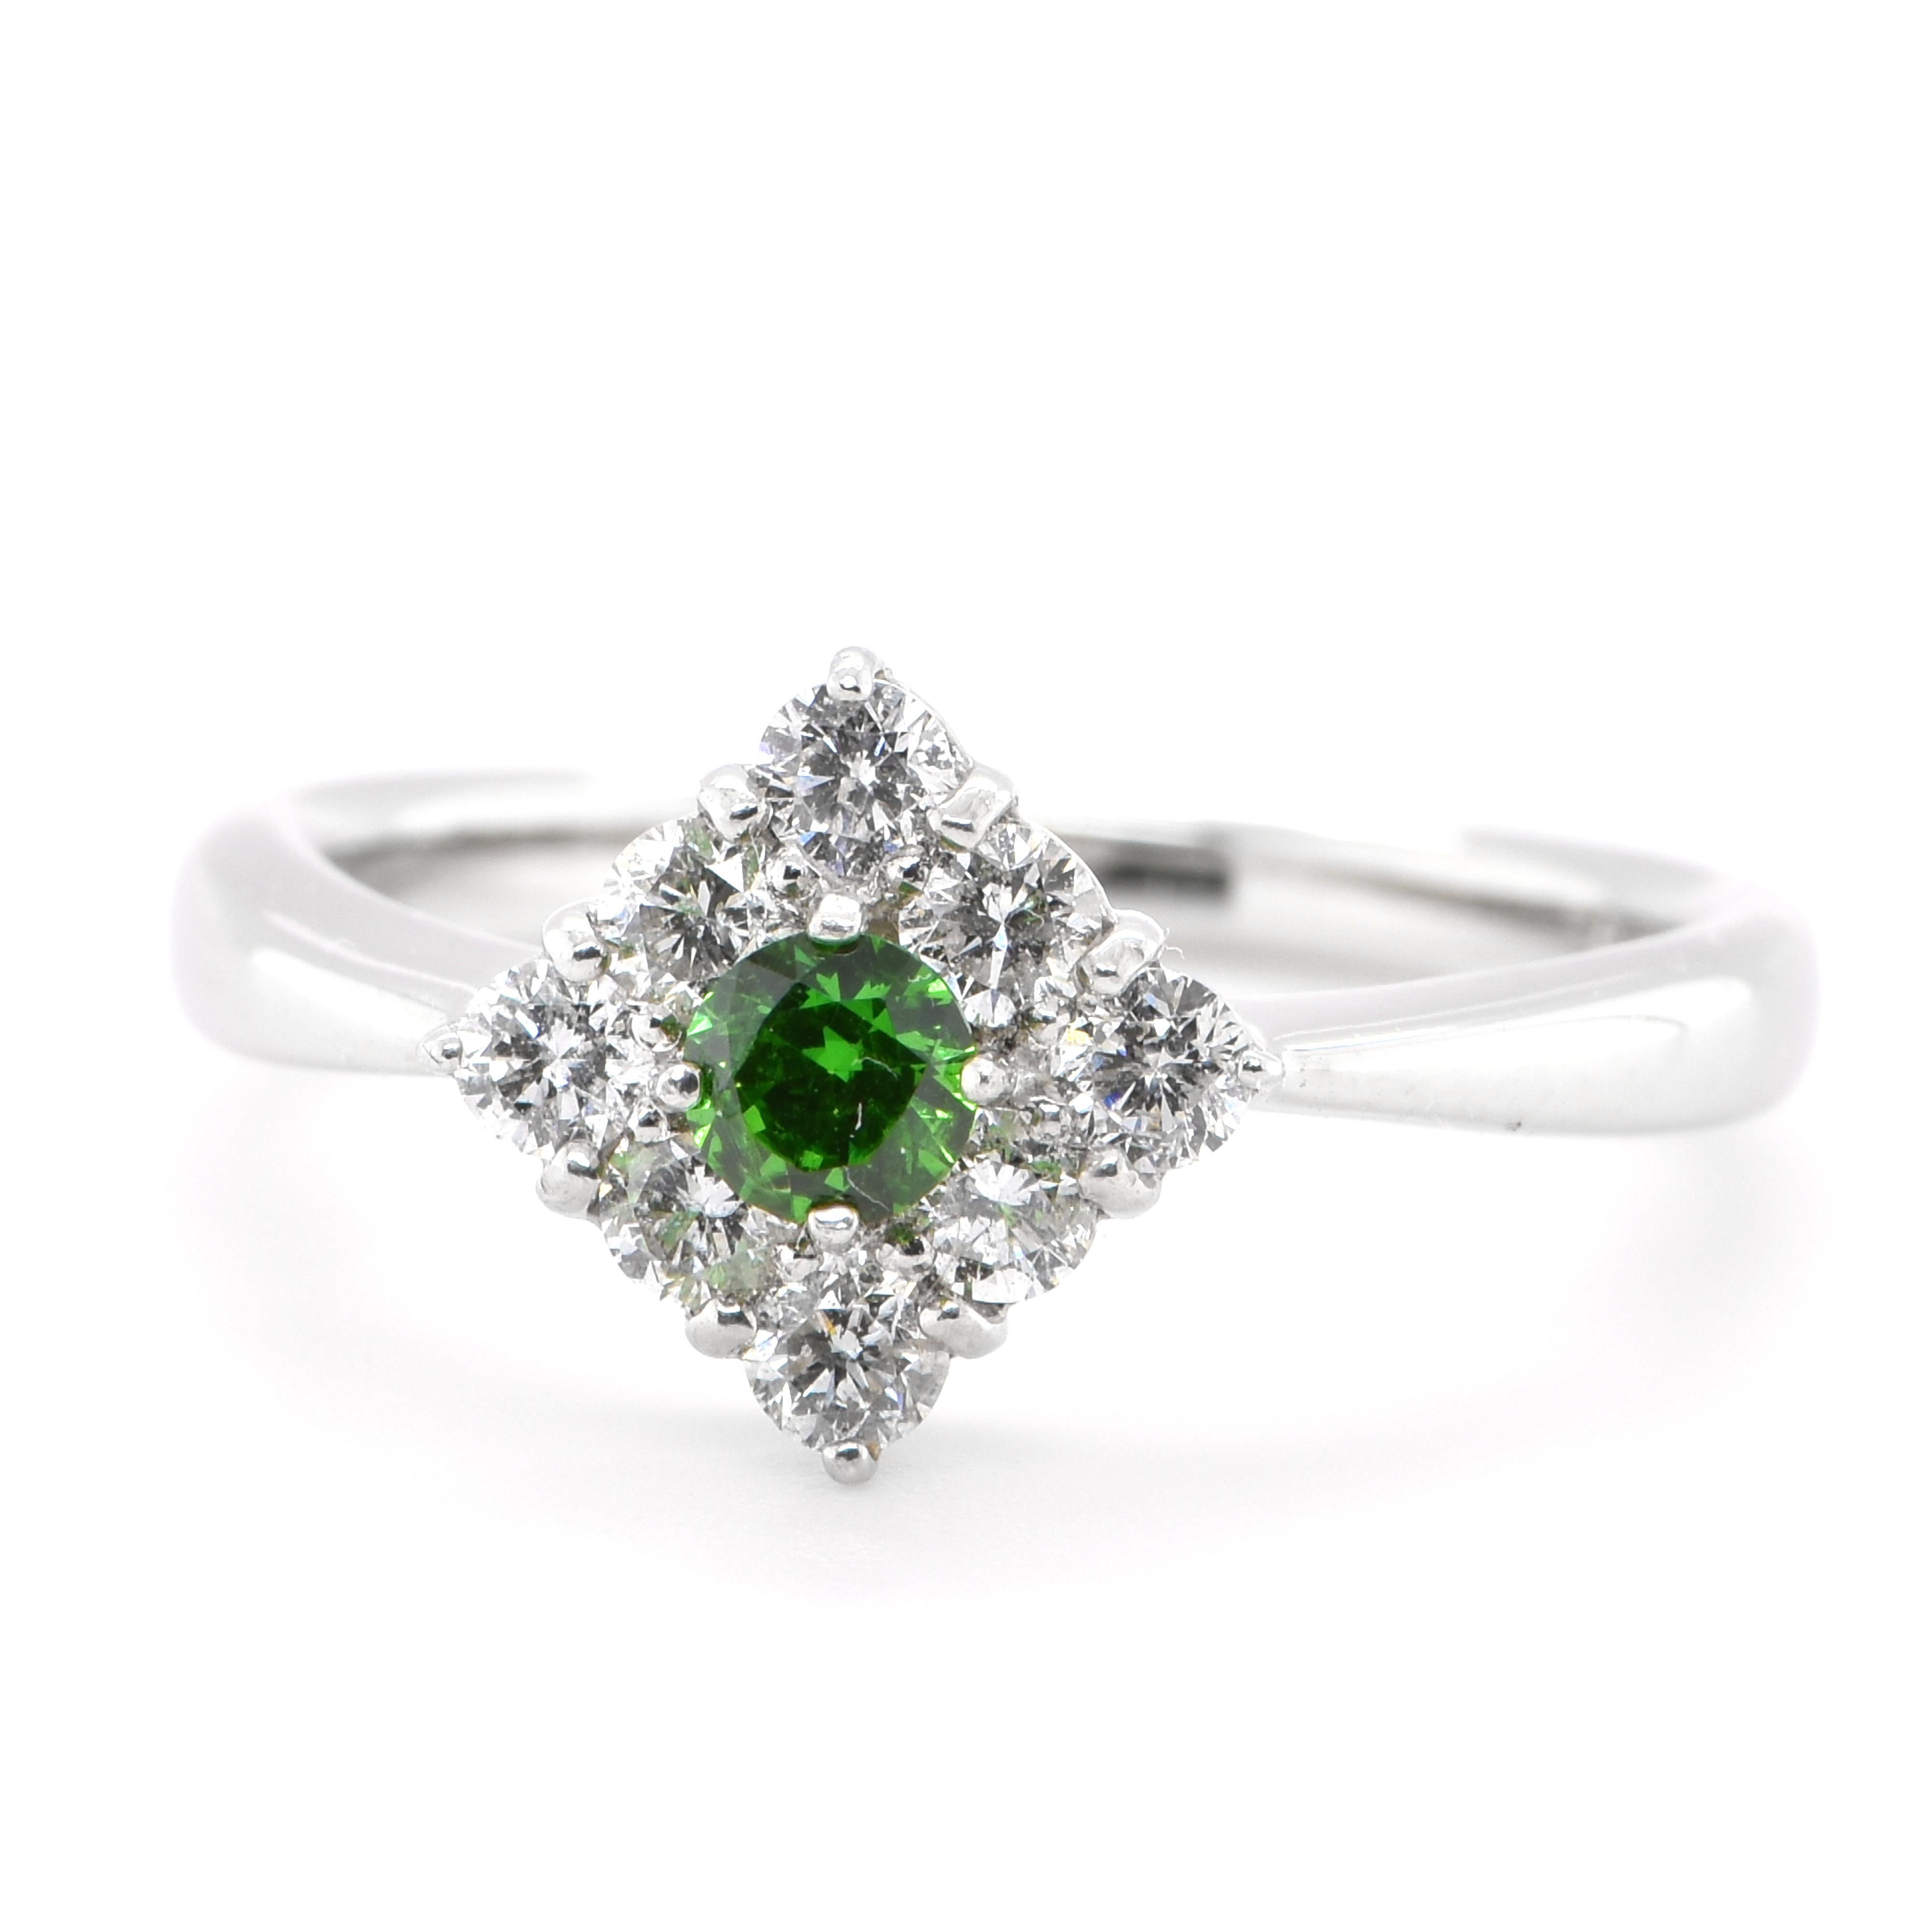 A beautiful cluster ring featuring a 0.19 Carat, Natural Demantoid Garnet and 0.41 Carats of Diamond Accents set in Platinum. Demantoid Garnet's only known source used to be the Ural Mountains in Russia however recent discoveries in Africa have